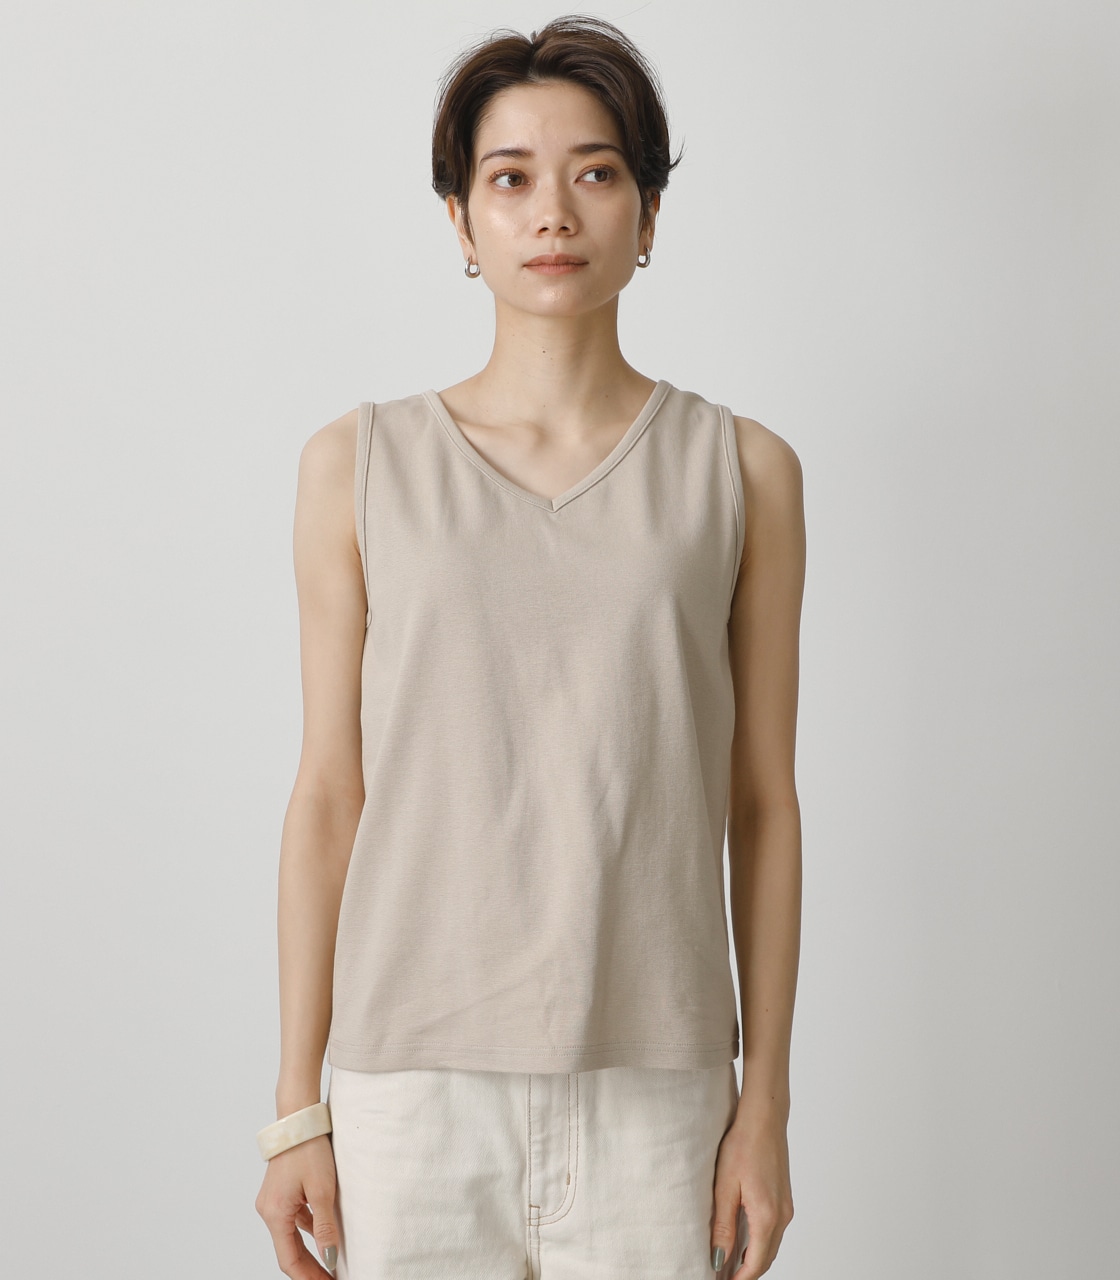 BACK LACE DOCKING TOPS/バックレースドッキングトップス 詳細画像 L/BEG 5